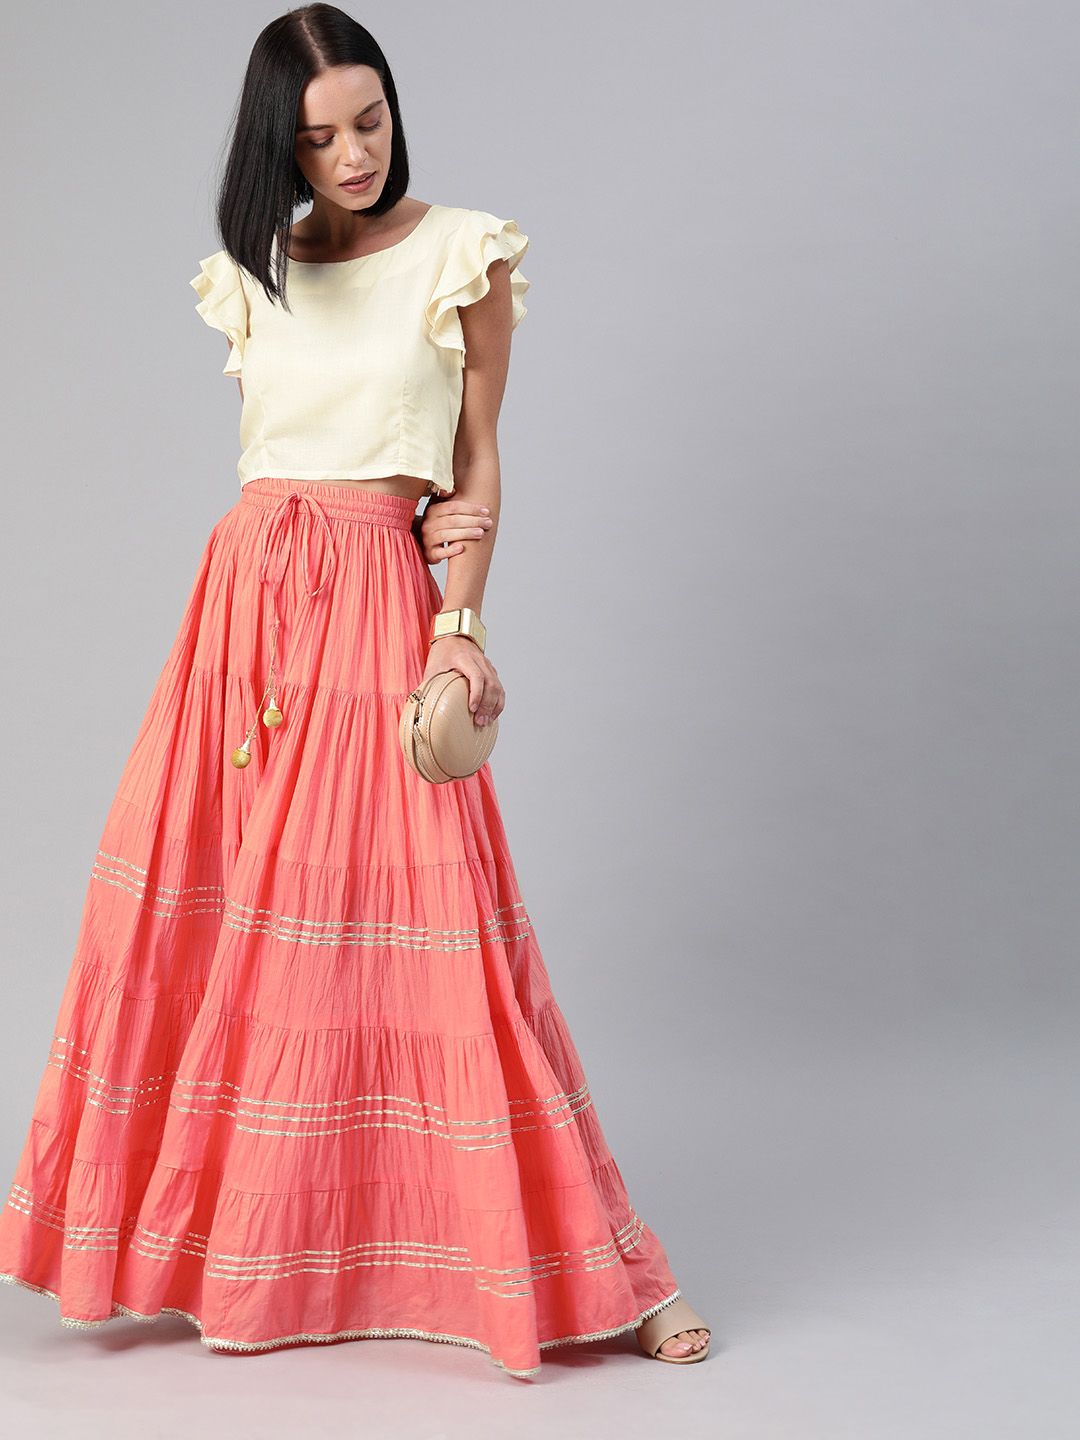 Geroo Jaipur Hand Crafted flared Peach Pure Cotton Skirt with White Crop Top Price in India